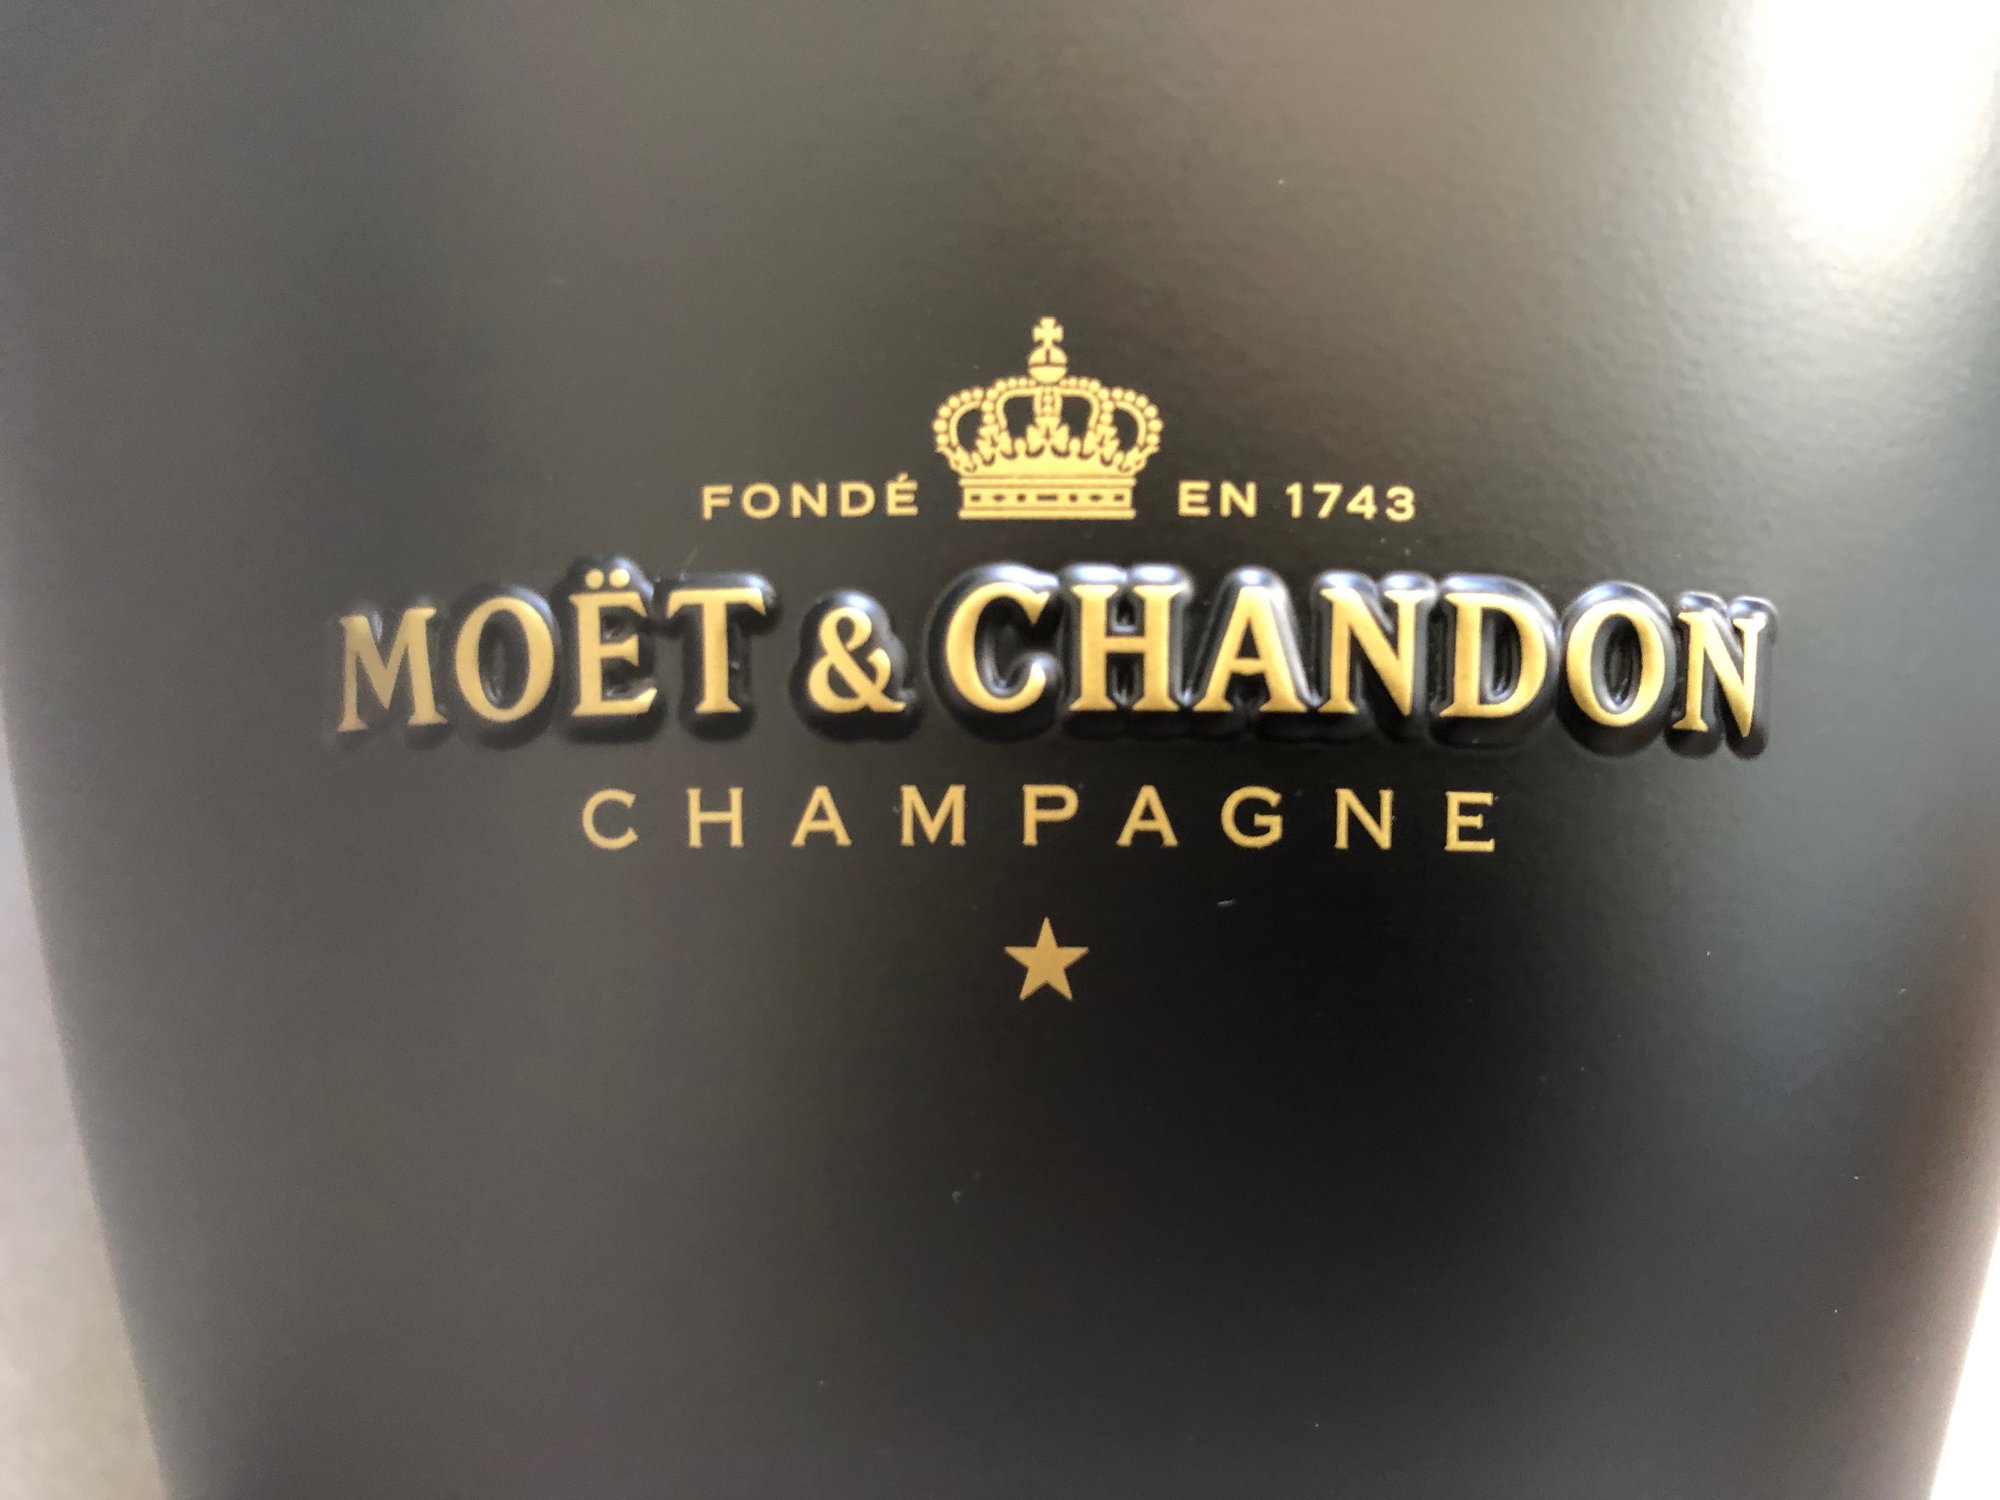 mo_t_chandon_champagne_bucket_in_gold_and_black_color_2020_design_champagneclub_6.JPG